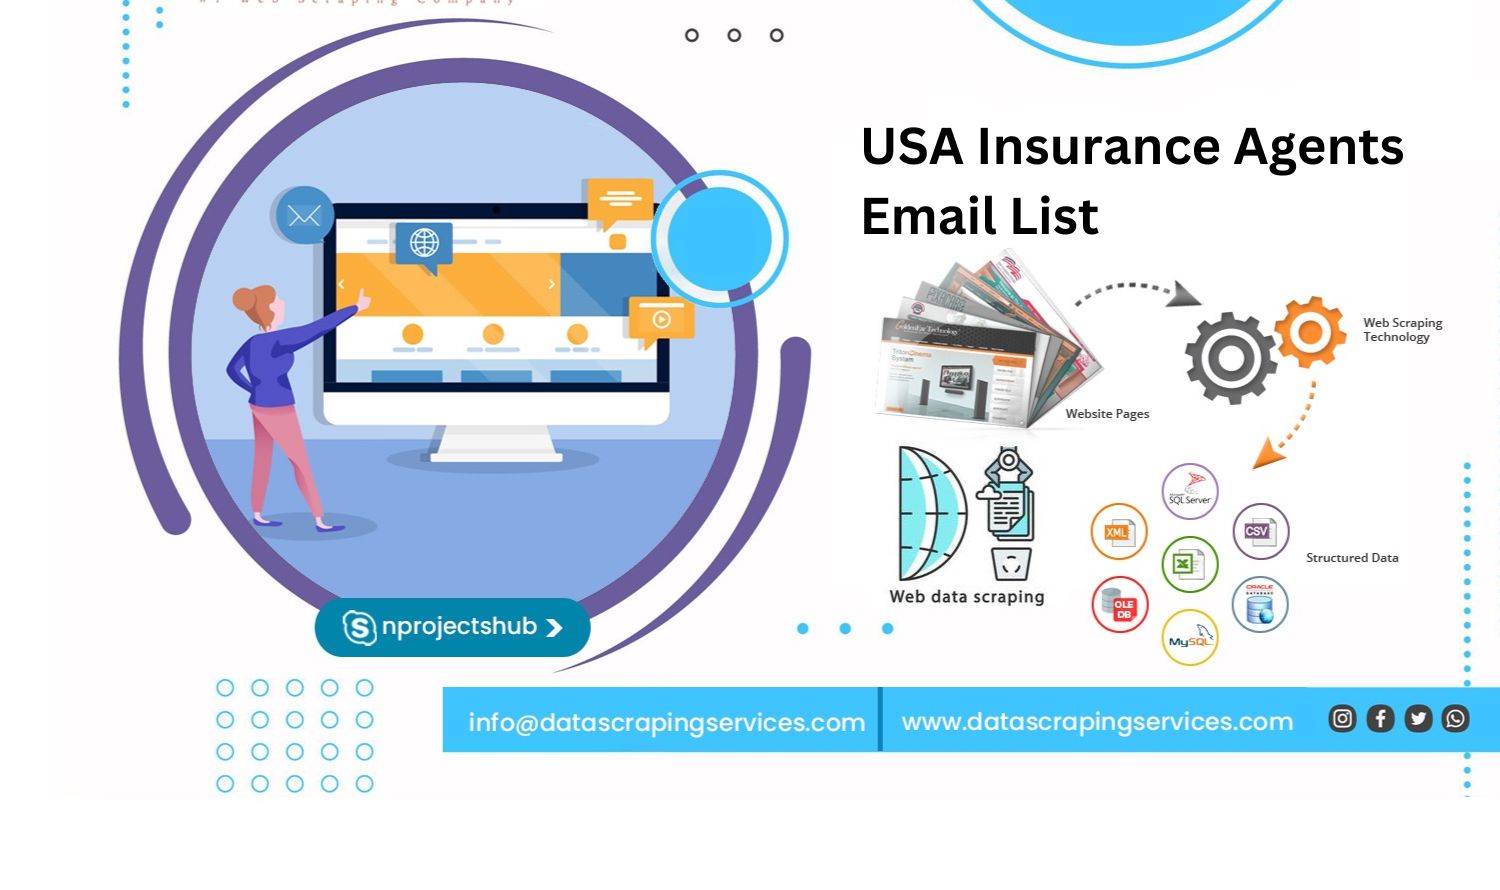 USA Insurance Agents Email List